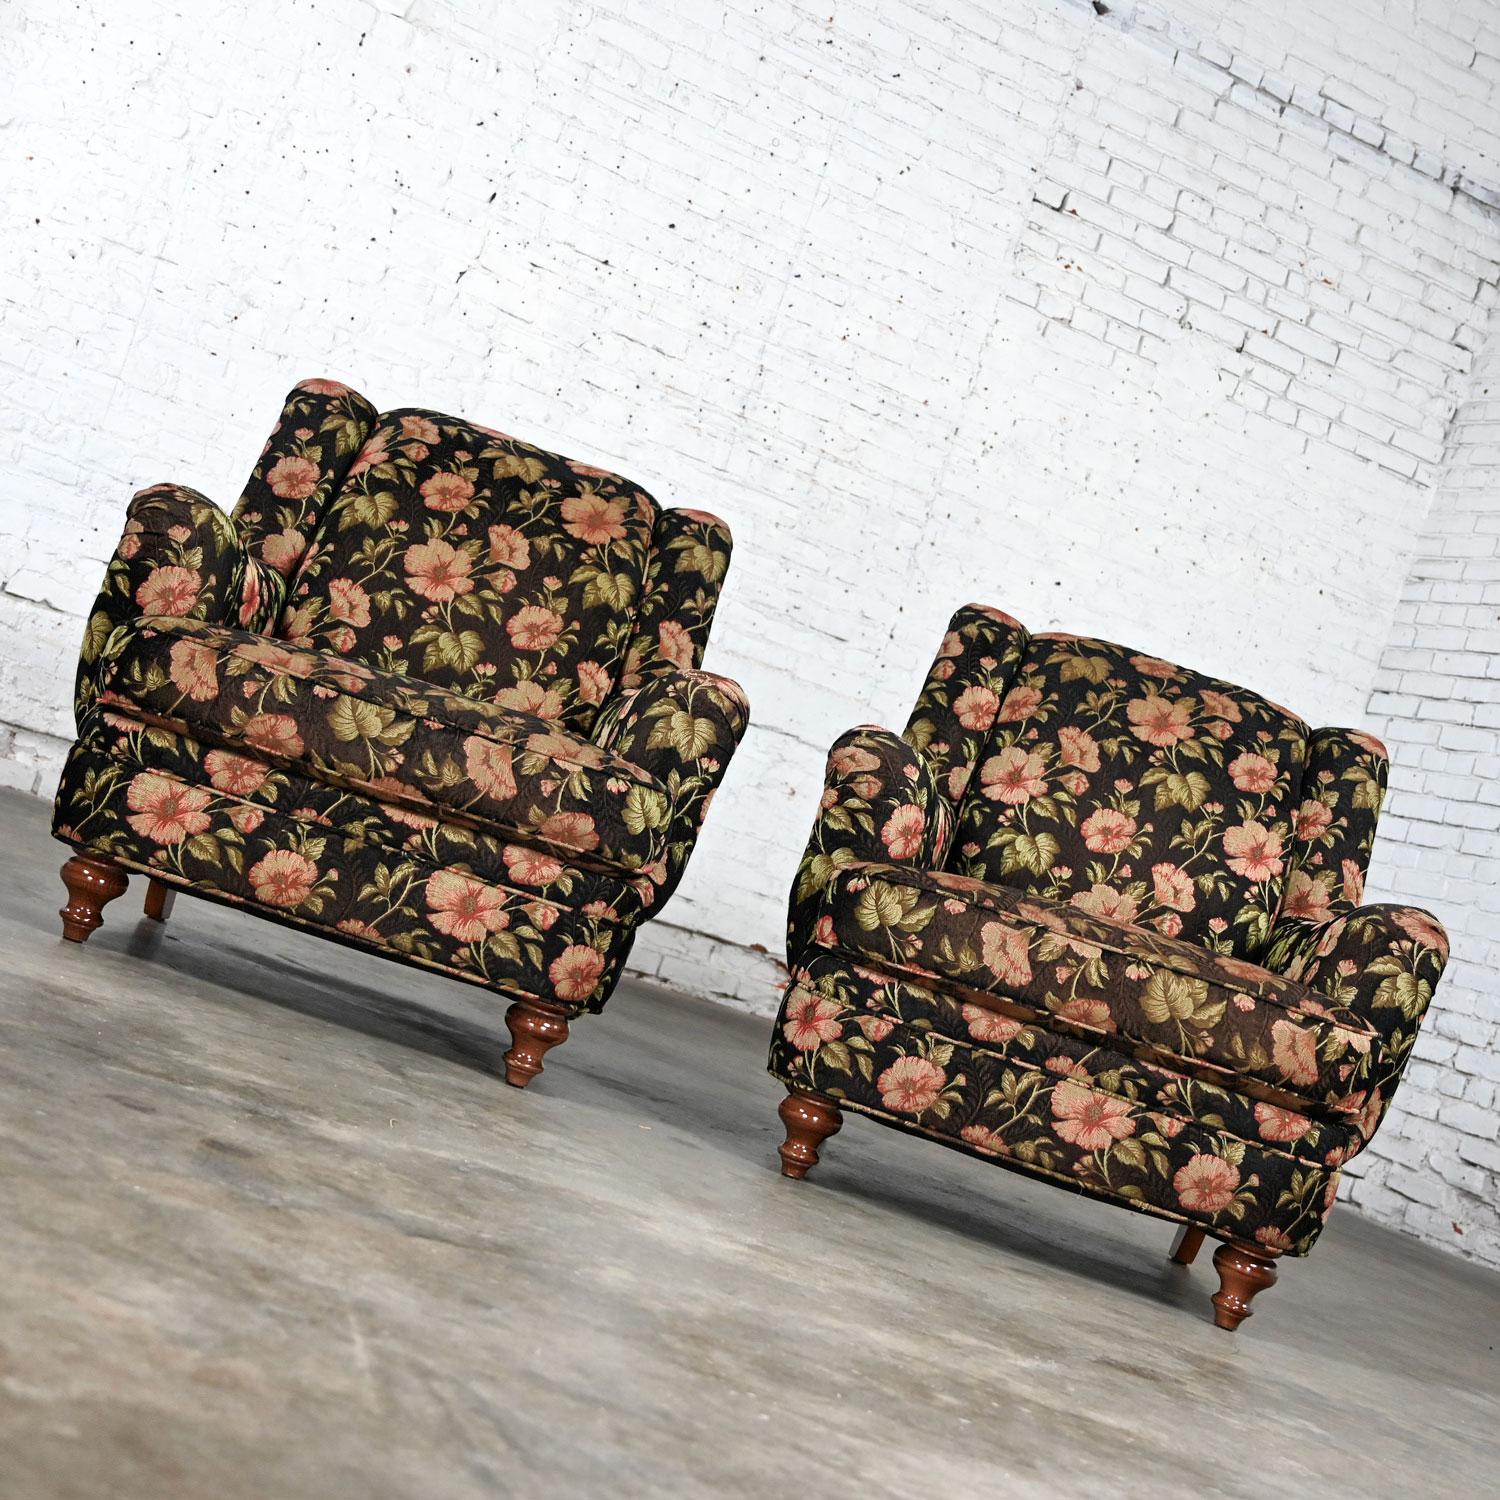 Cottagecore Style Pair Floral Lounge Chairs Sam Moore Furniture Division Hooker In Good Condition For Sale In Topeka, KS